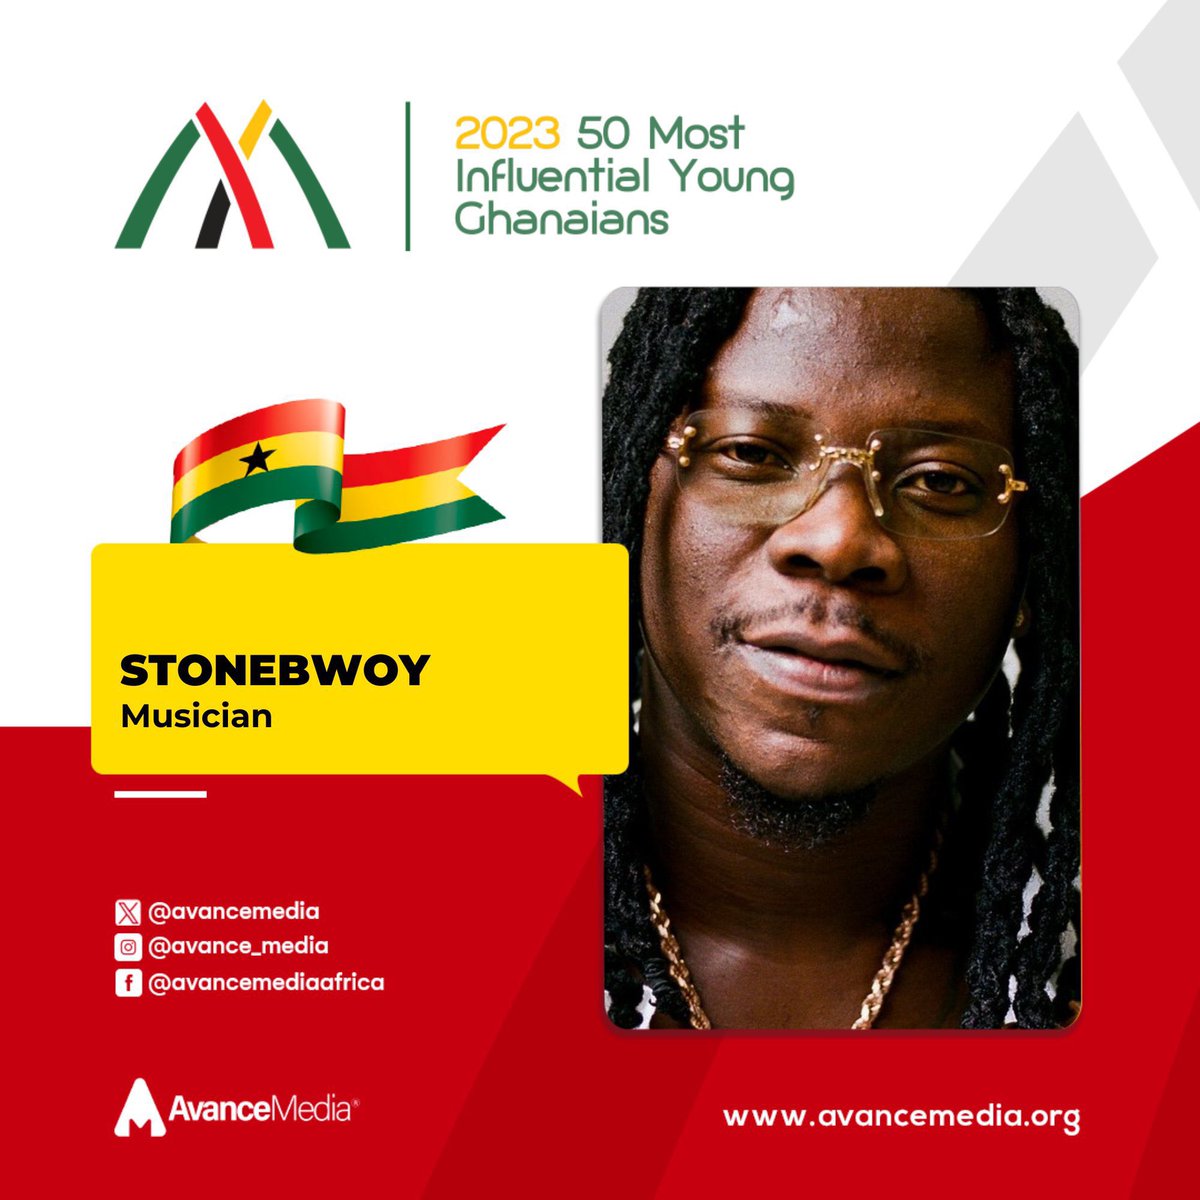 In 2023 Stonebwoy makes the list of 50 Most Influential Young Ghanaian which is powered by @avancemedia.
@stonebwoy 🐐 💯🔥
#StonebwoyRecap2023